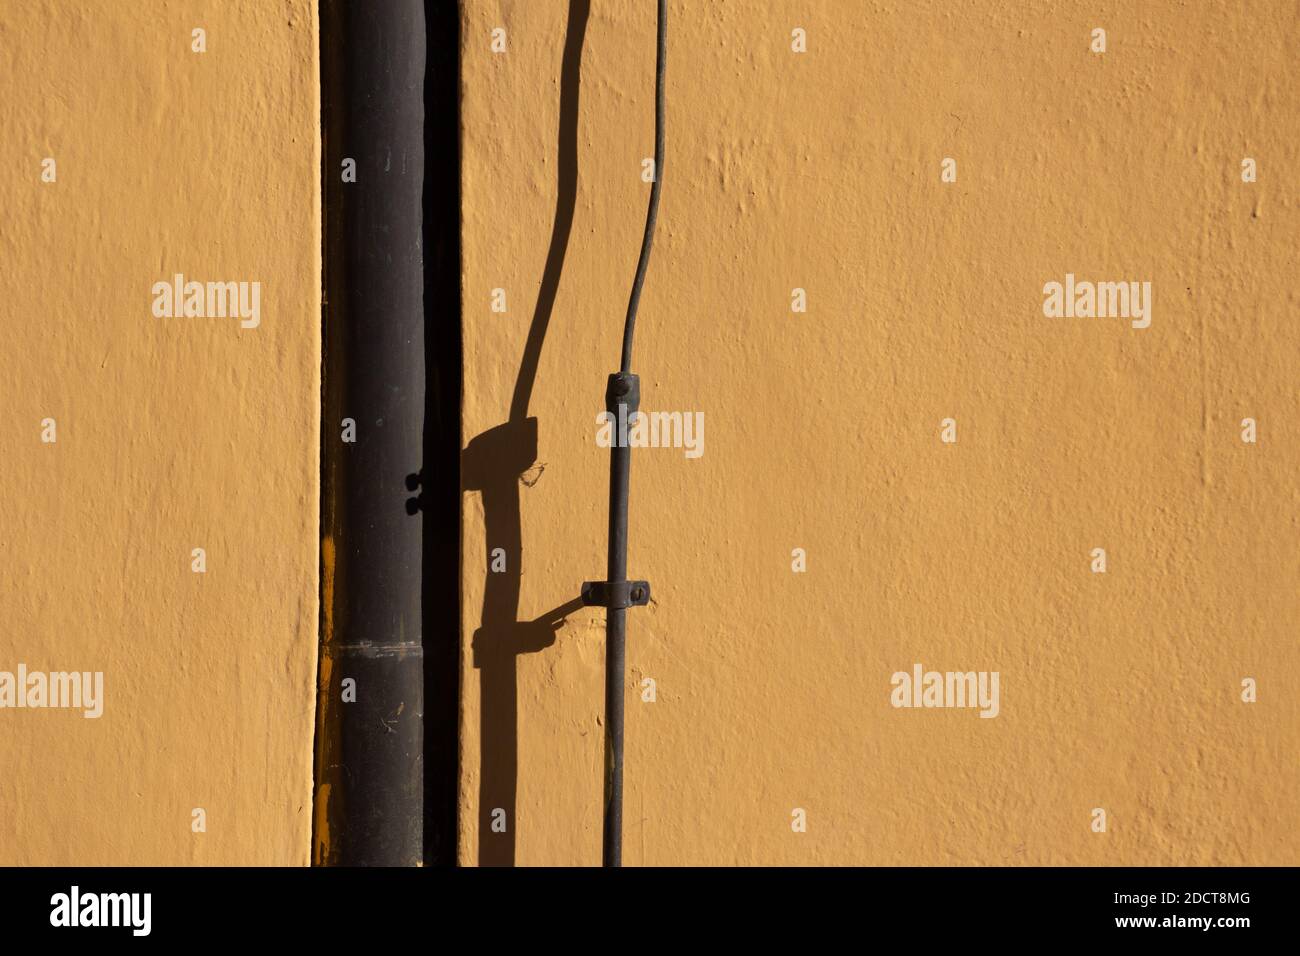 Brown metal downpipe and lightning rod casting shadows on a orange colored wall Stock Photo